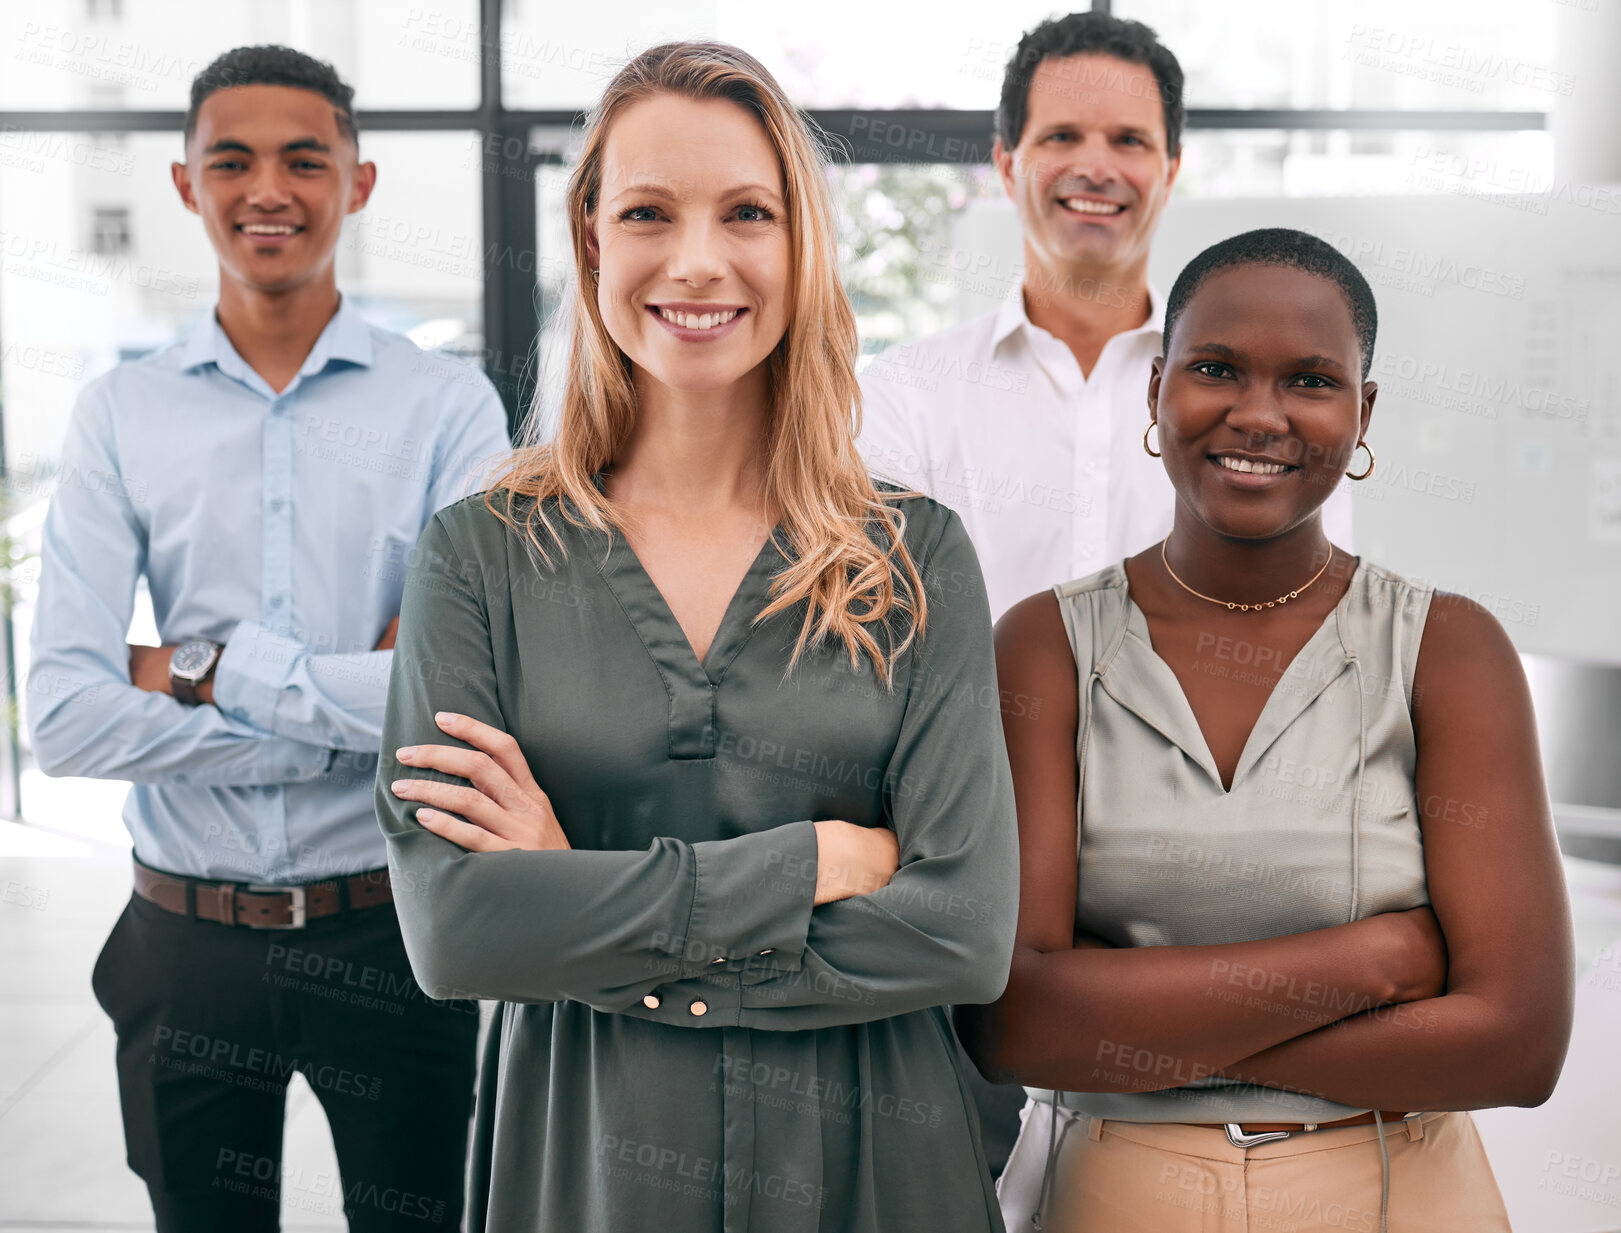 Buy stock photo Diversity, marketing and business team portrait of startup social media advertising company. Business people, management or employee in office building together in support, teamwork and collaboration